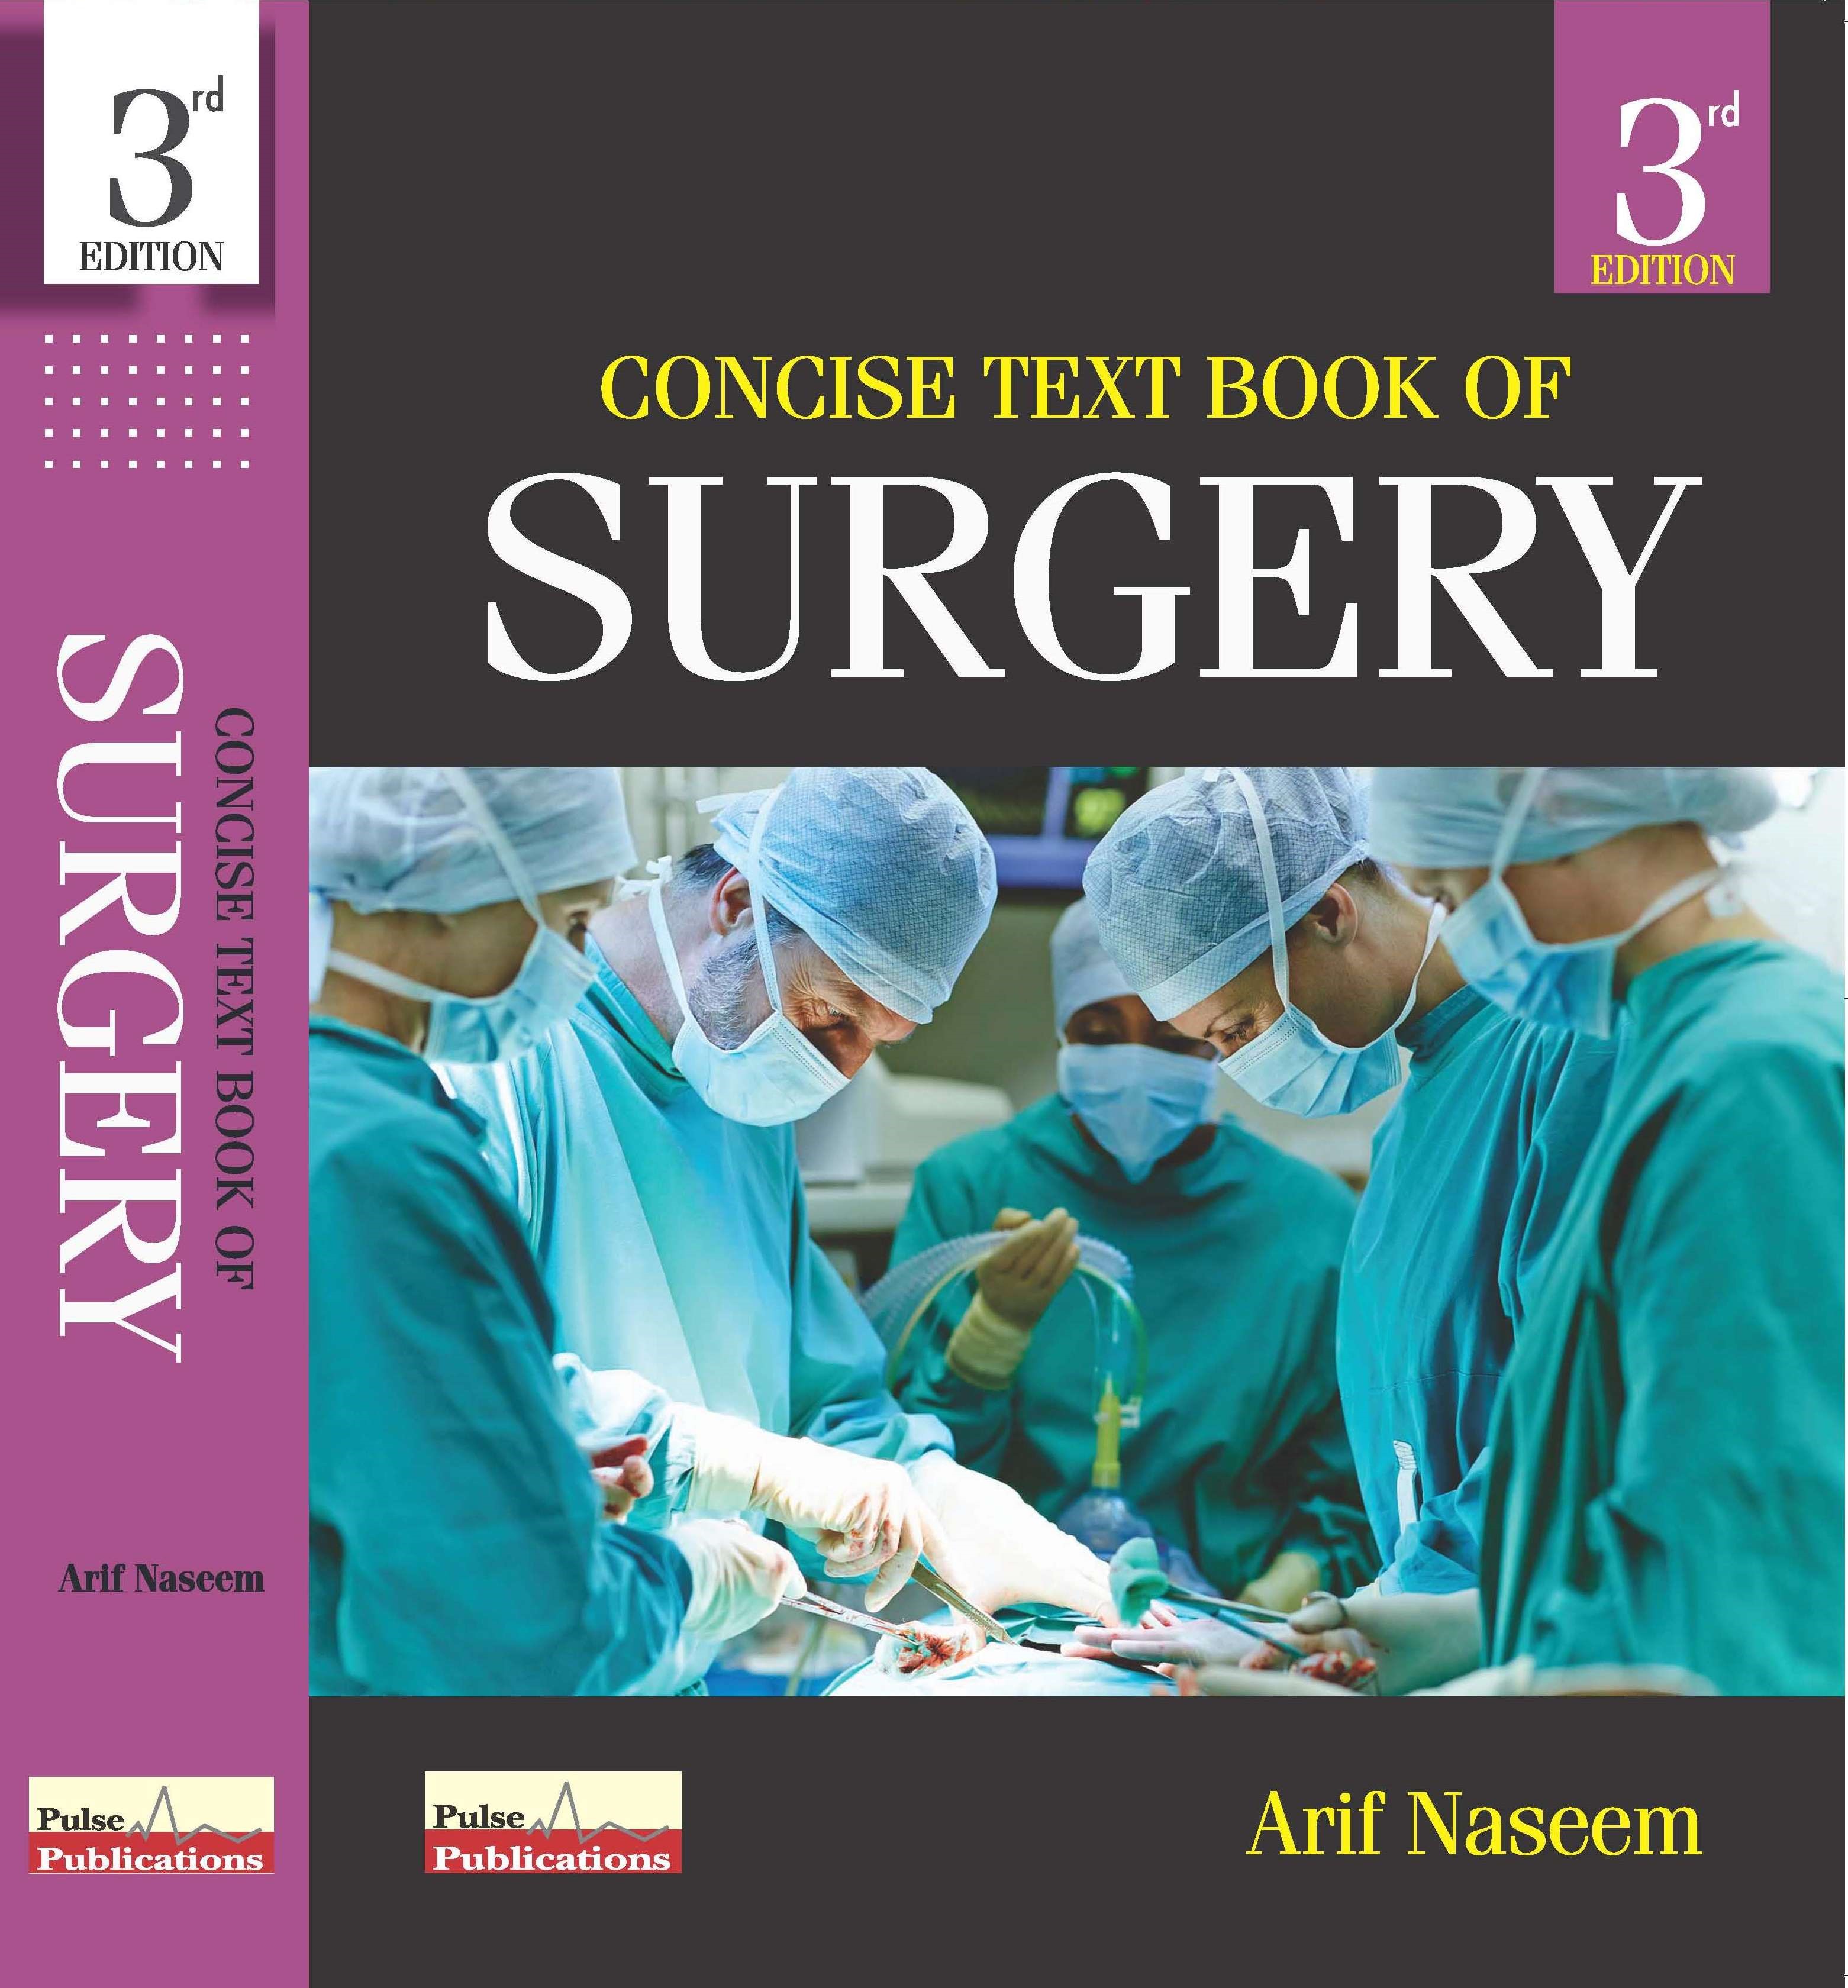 CONCISE TEXTBOOK OF SURGERY 3RD EDITION 2022